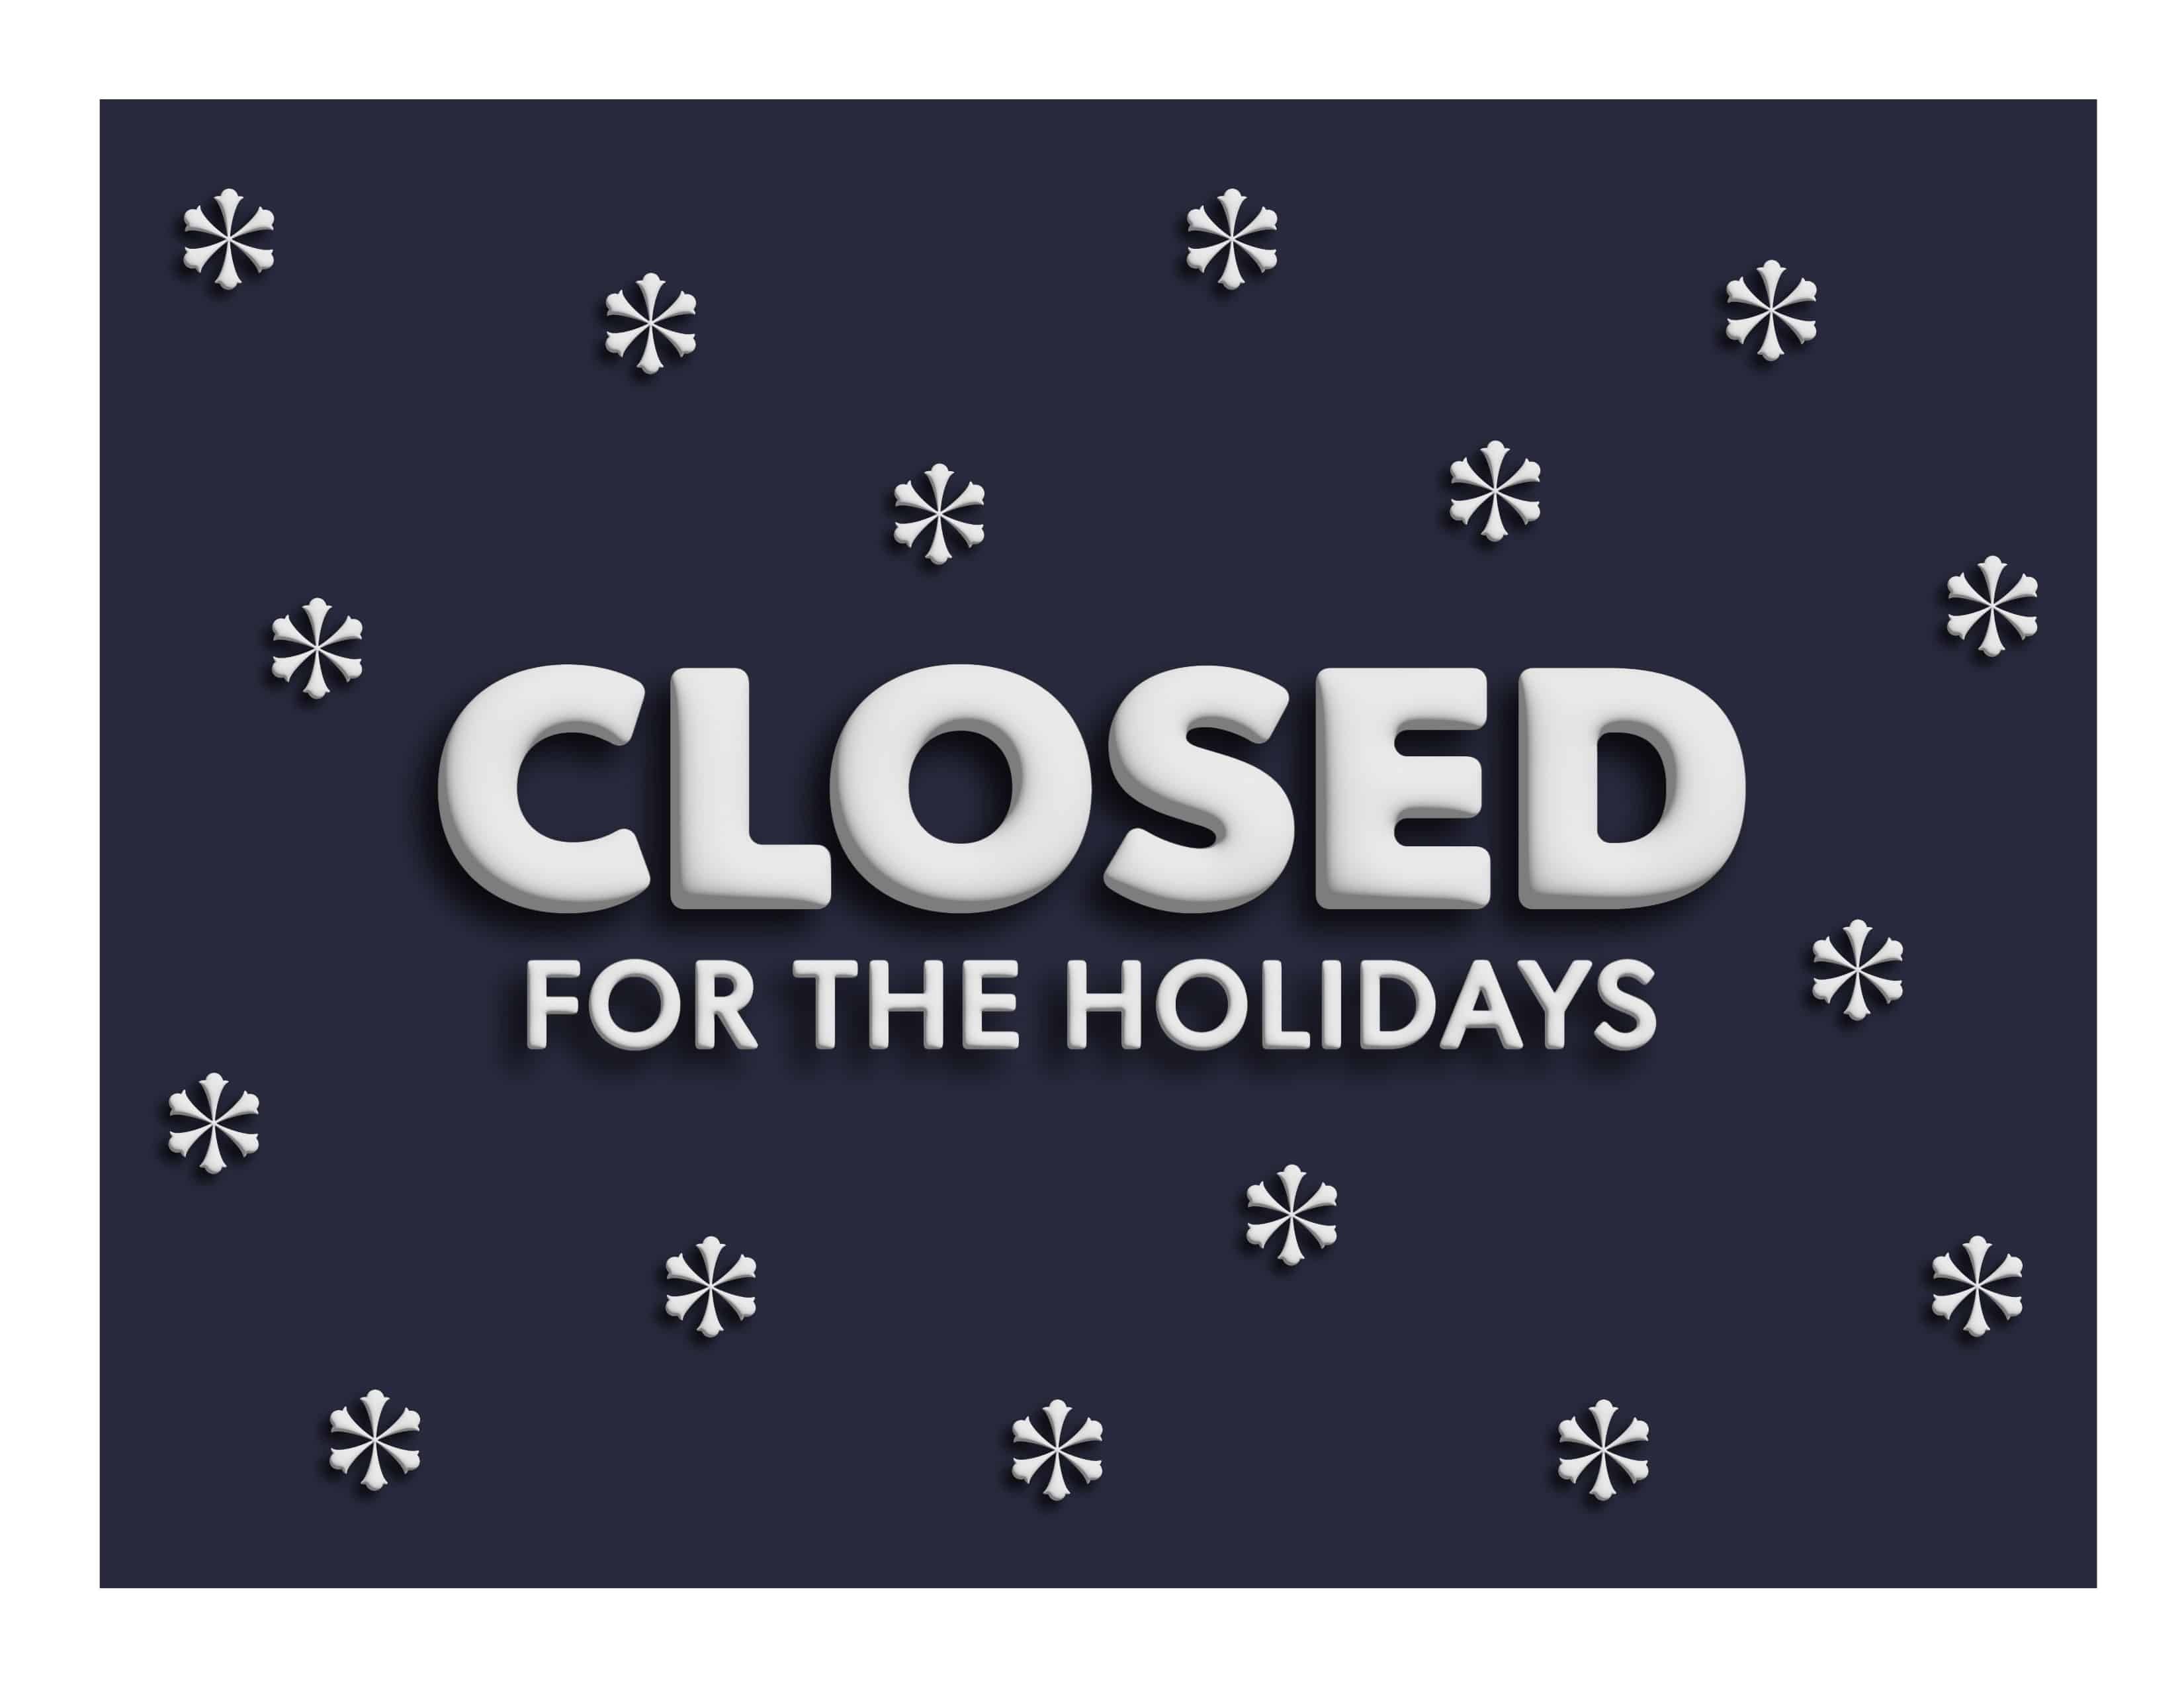 closed sign saying "closed for the holidays" in puffy marshmallow-like letters and snowflakes scattered throughout